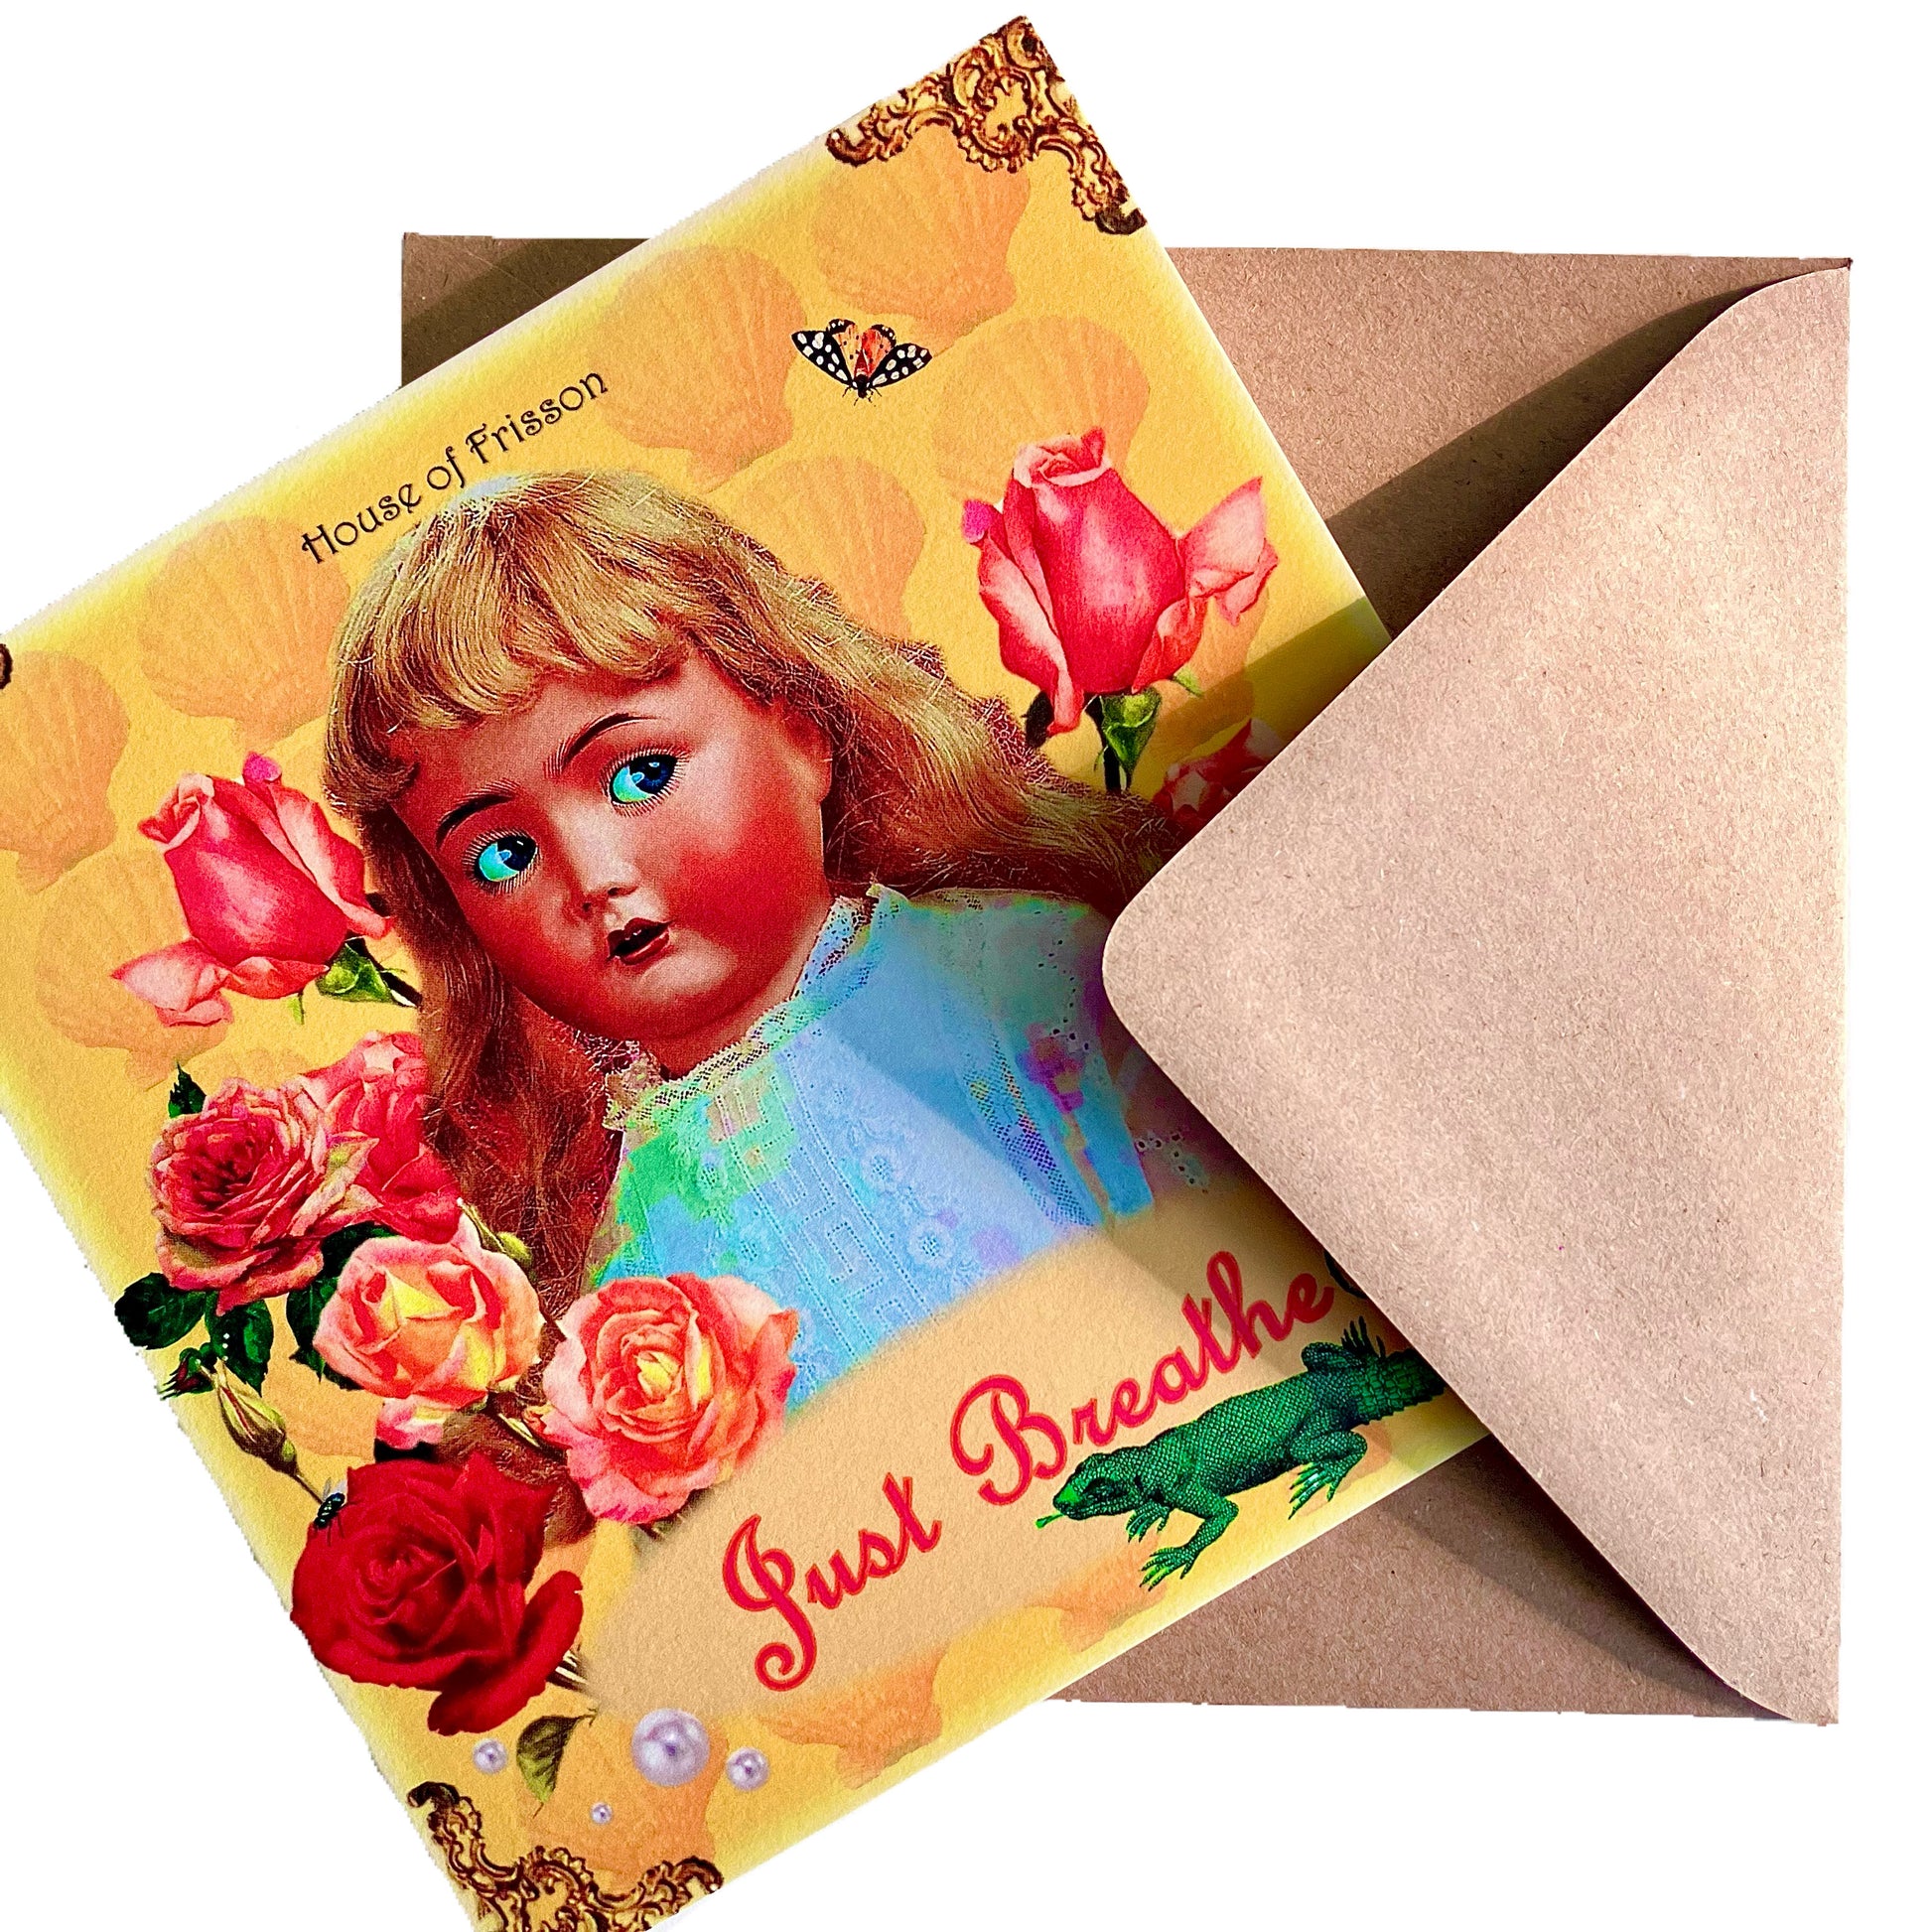 "Just Breathe" Greeting Card by House of Frisson. Featuring a vintage doll surrounded by roses, pearls, a moth, and a lizard, on a yellow background.